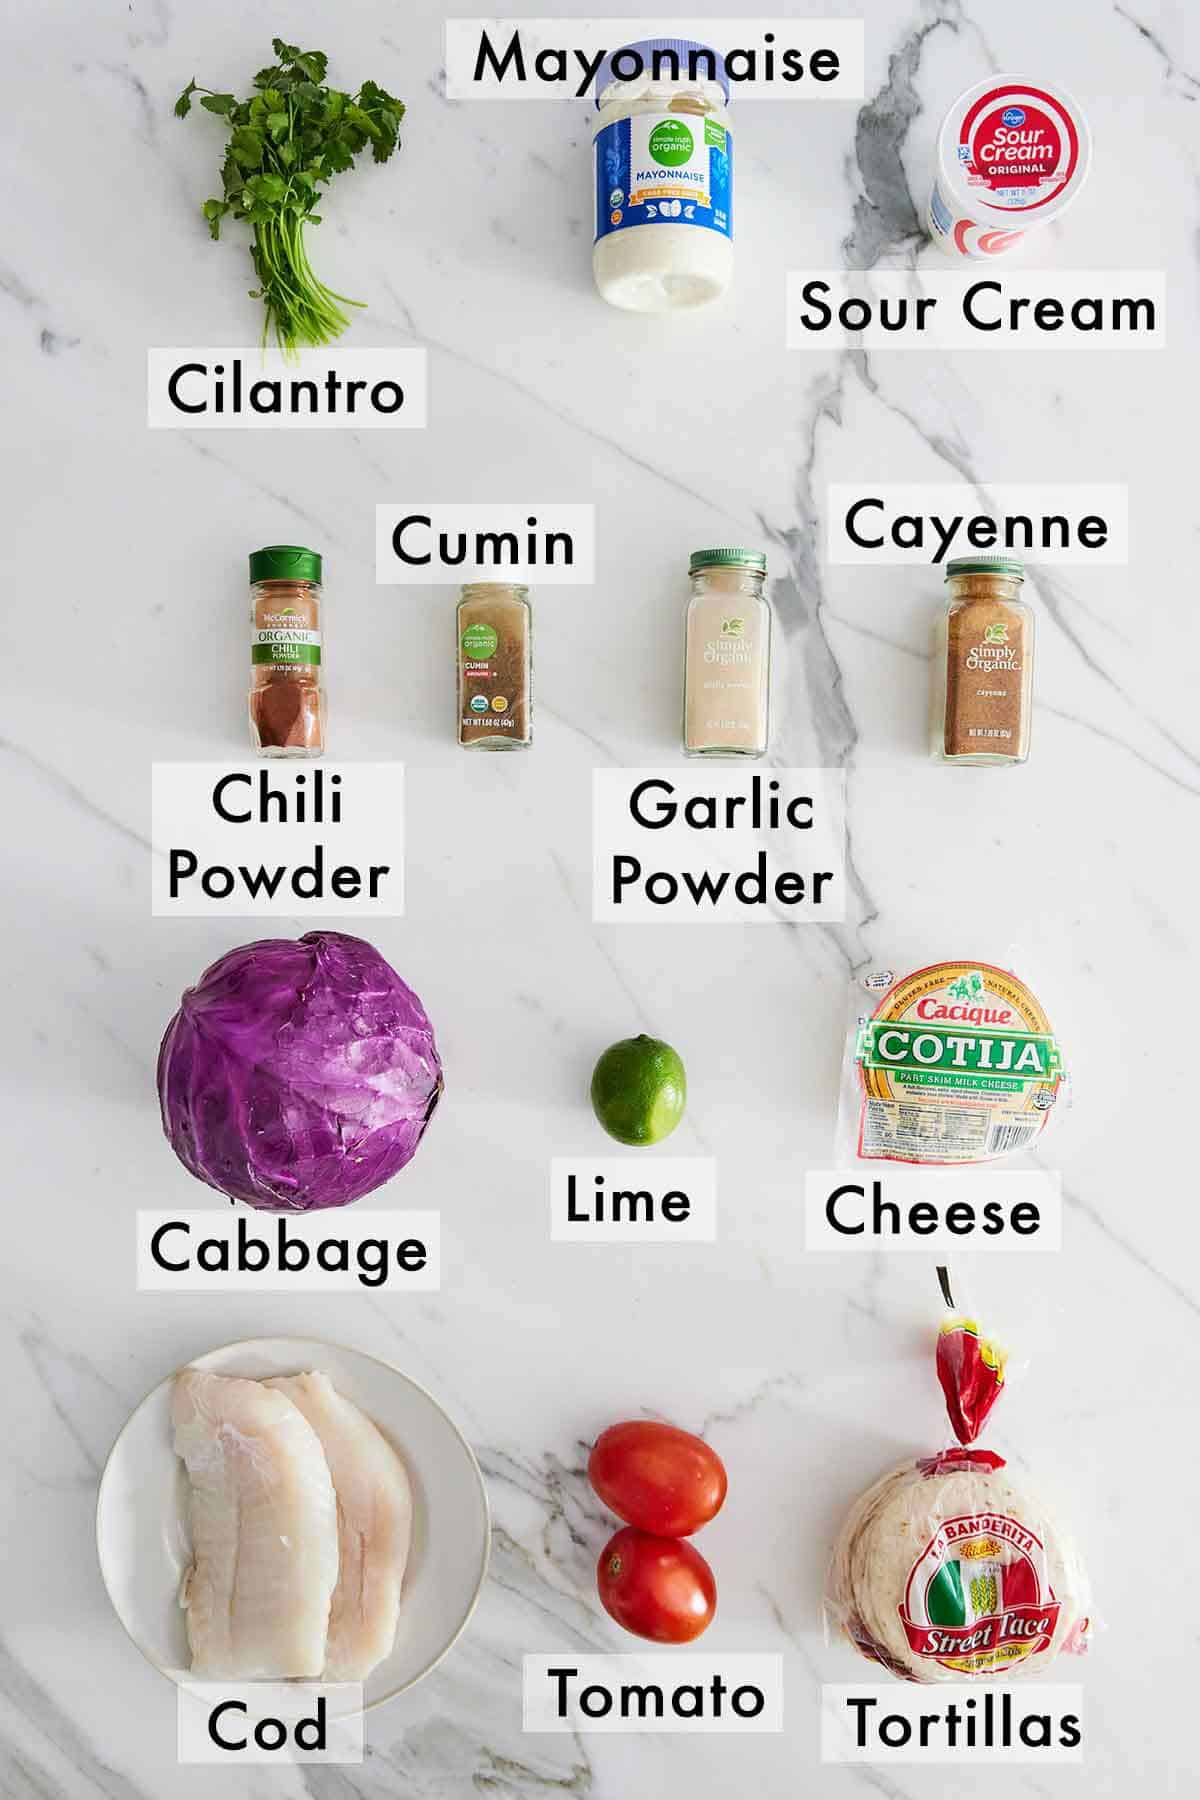 Ingredients needed to make fish tacos.